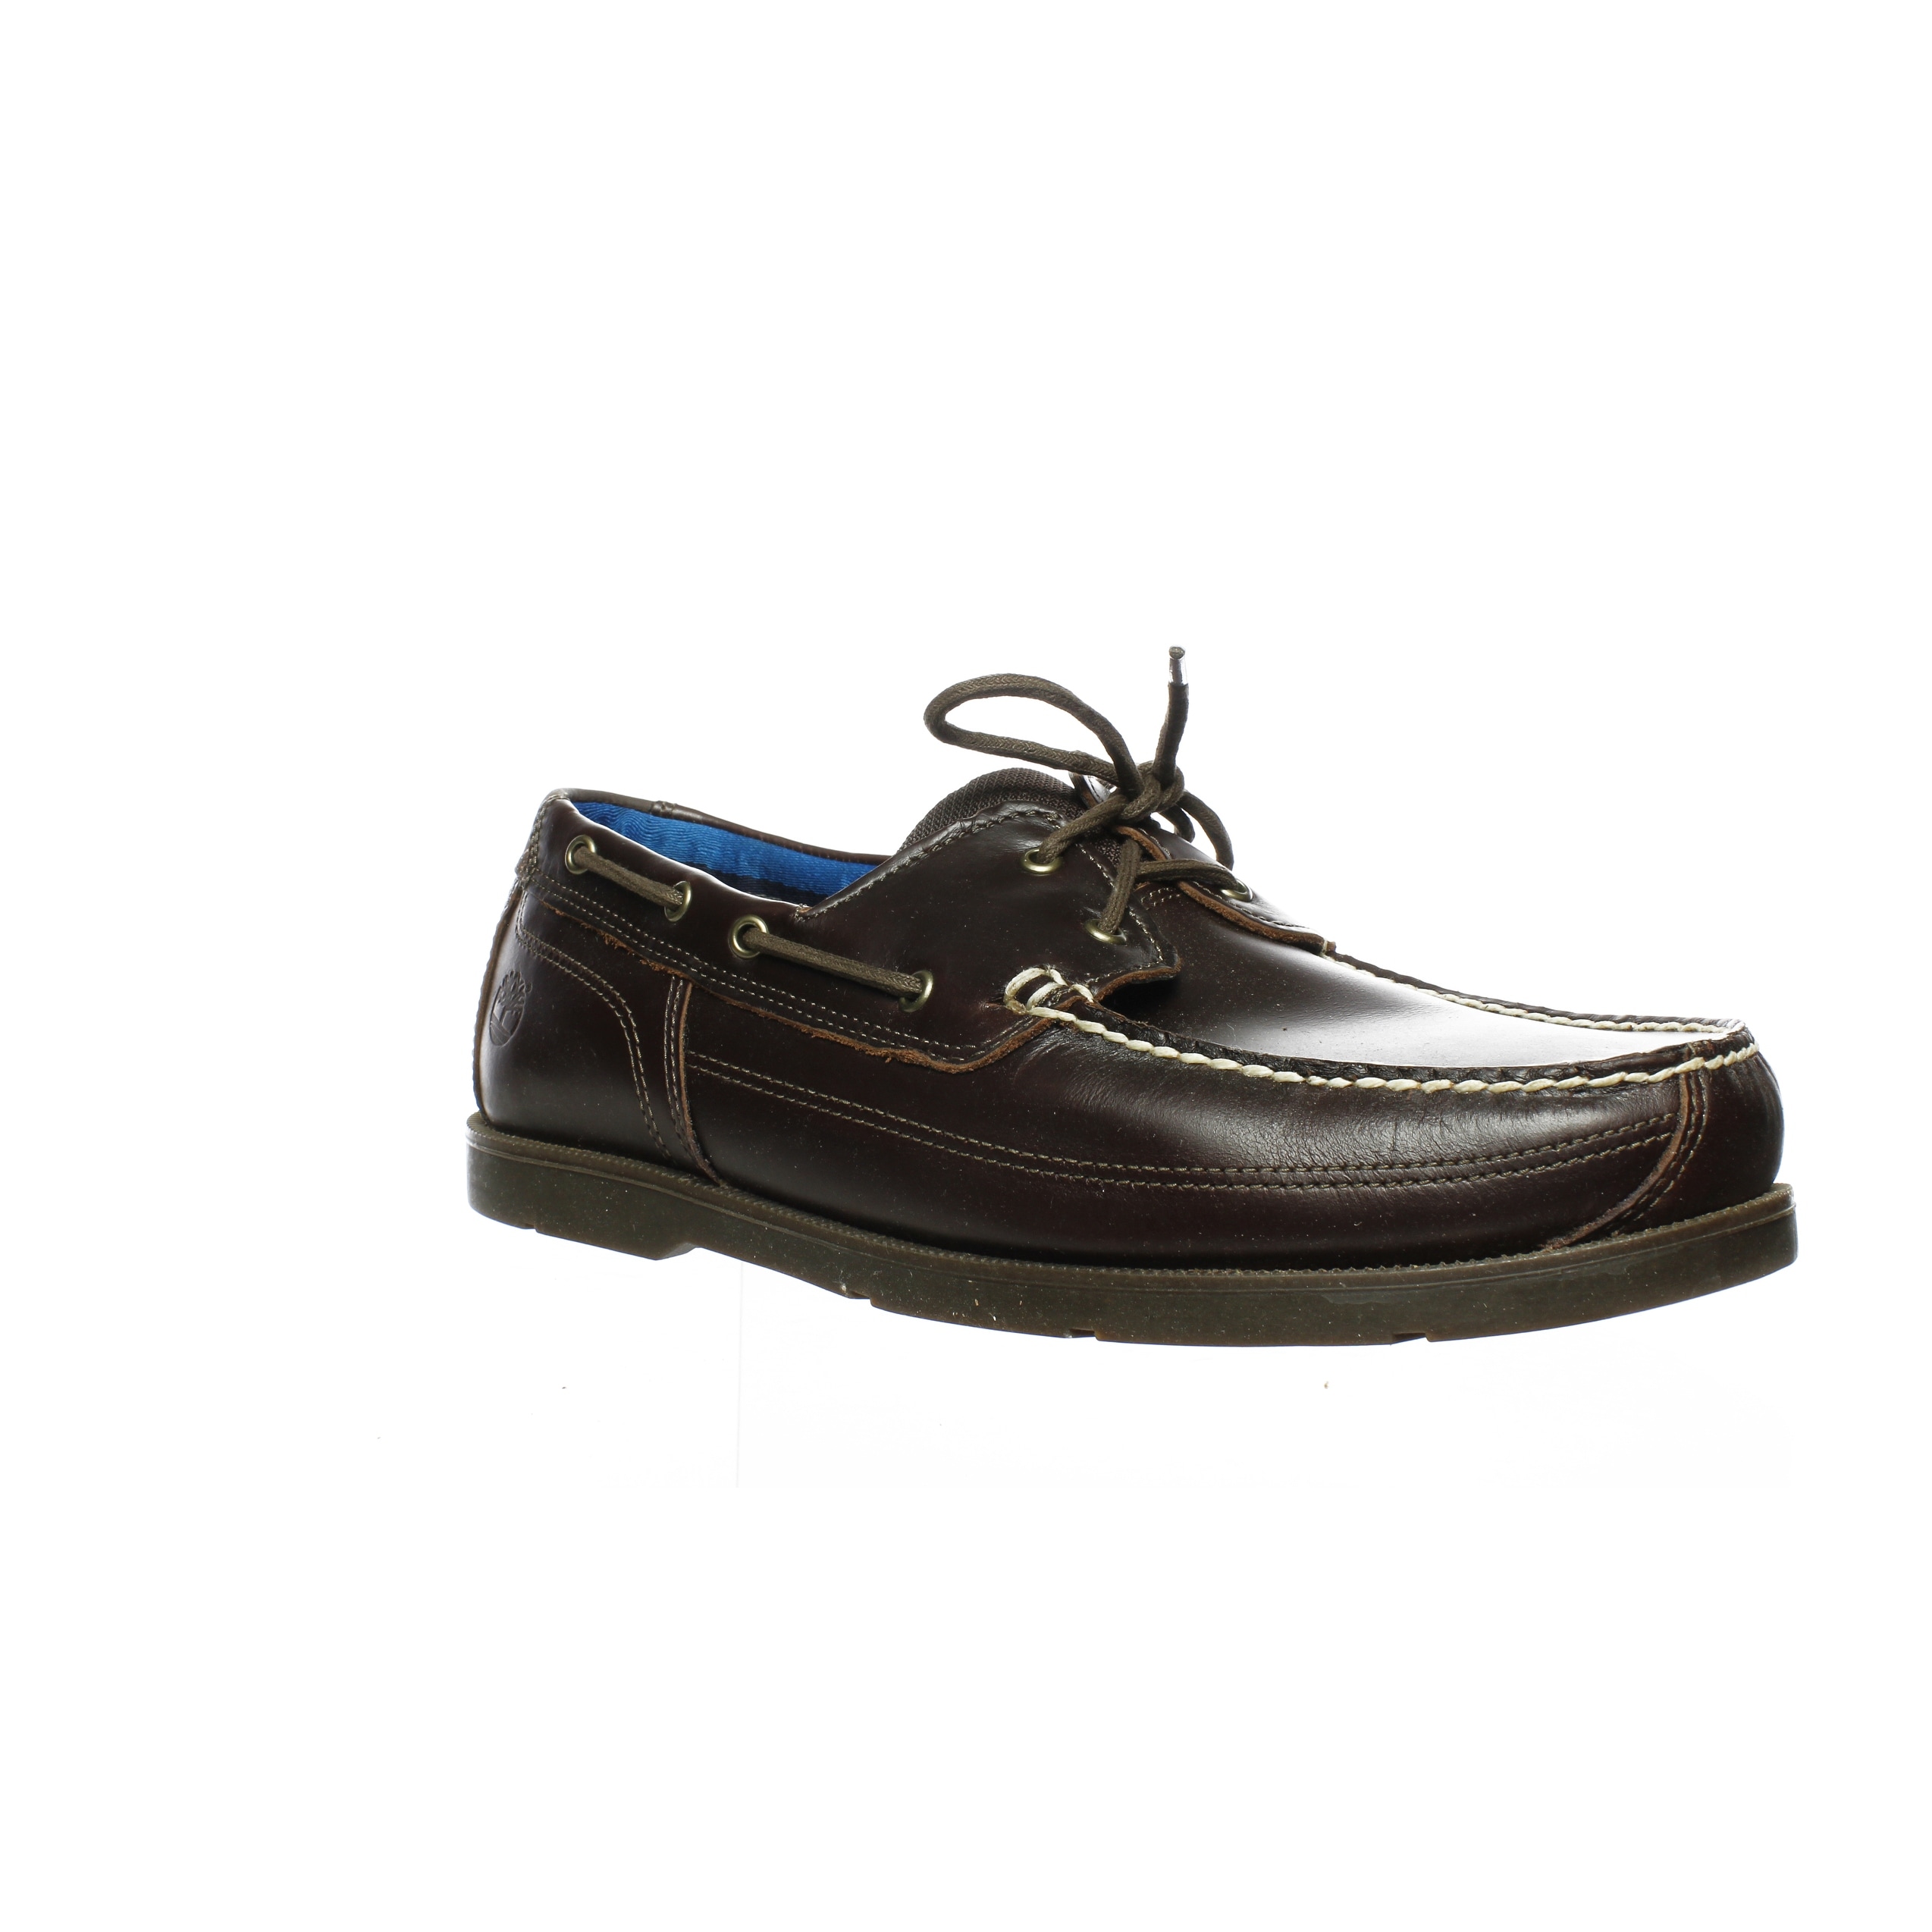 size 13 boat shoes